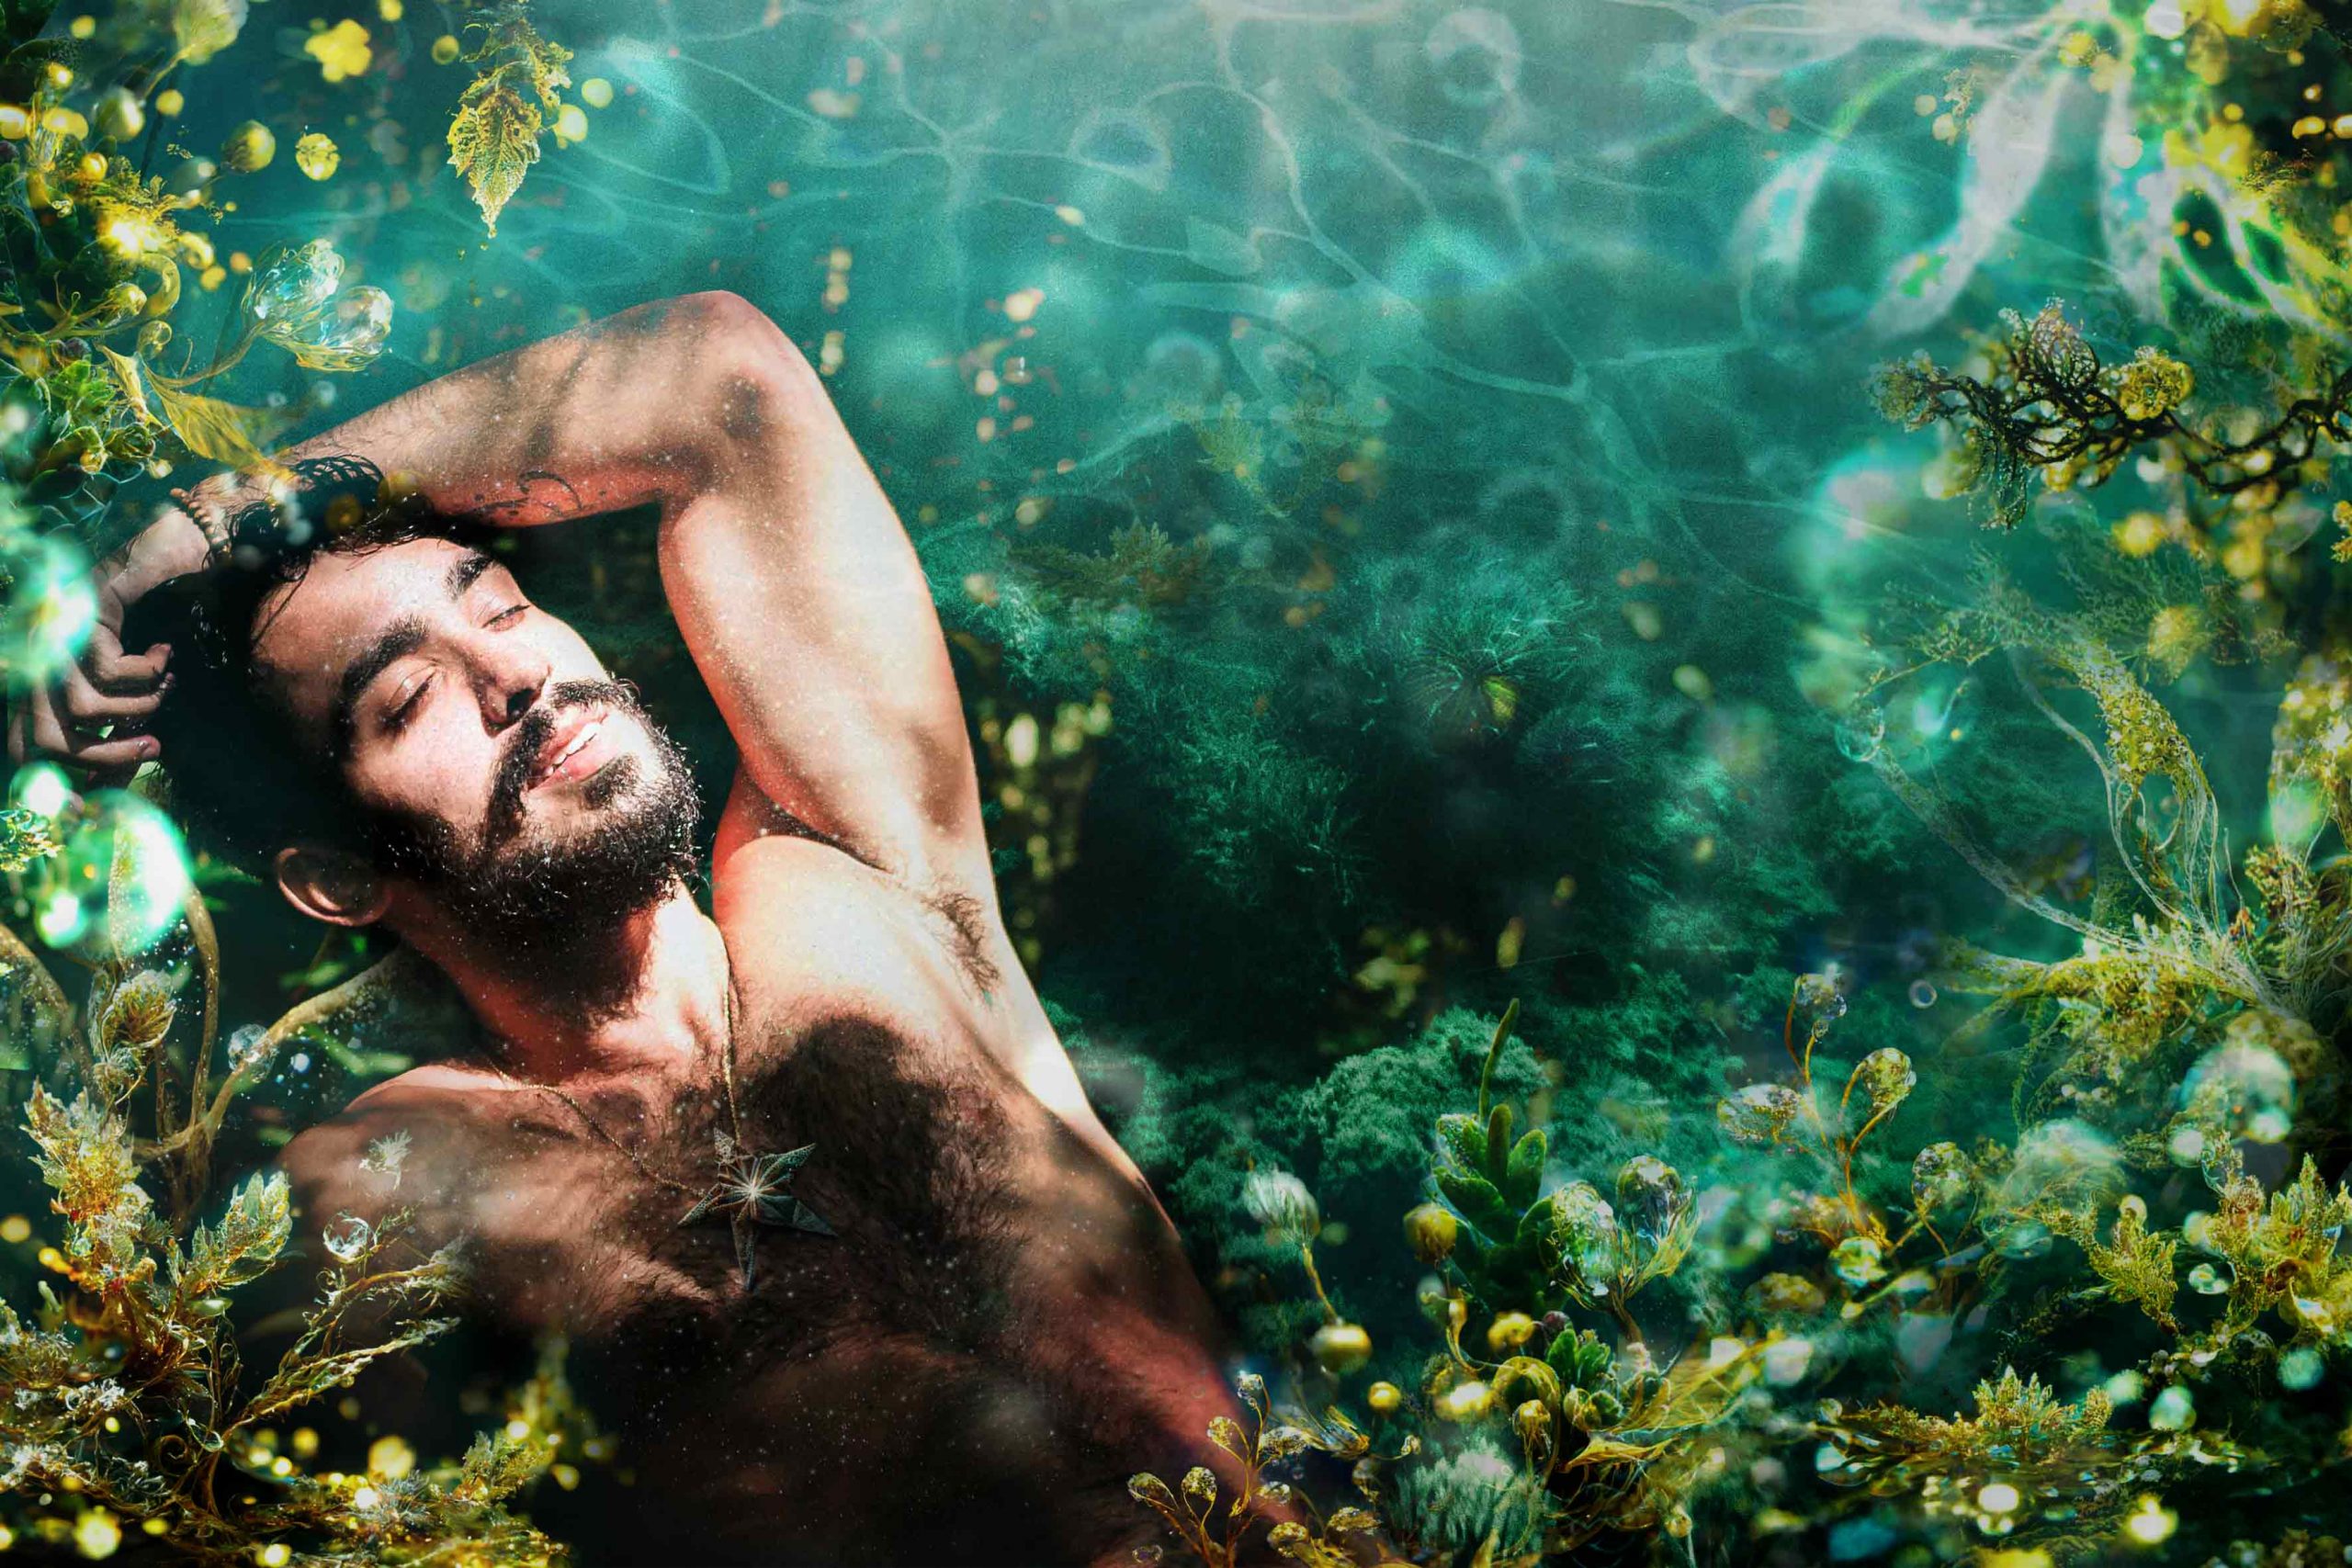 A bearded man lies back in sunlight, immersed in a fairytale-inspired, under the sea background with a starfish necklace on his exposed chest